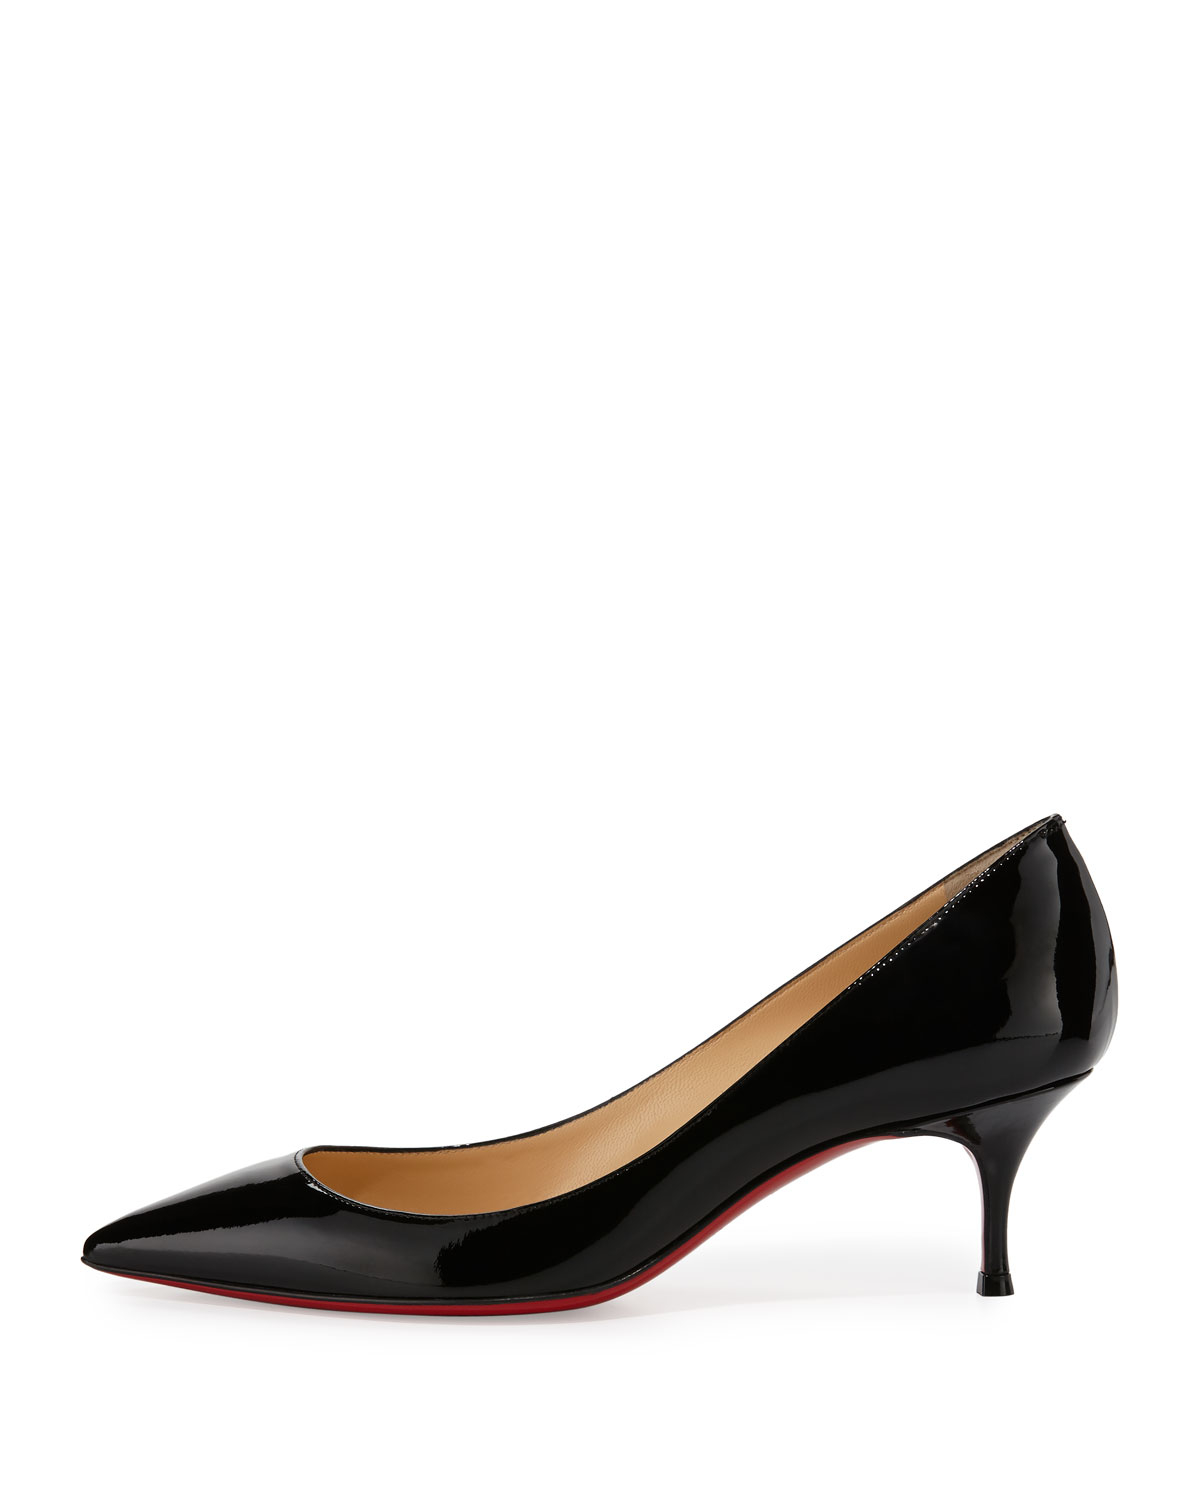 Christian louboutin Pigalle Follies 55mm Patent Red Sole Pump in Black ...